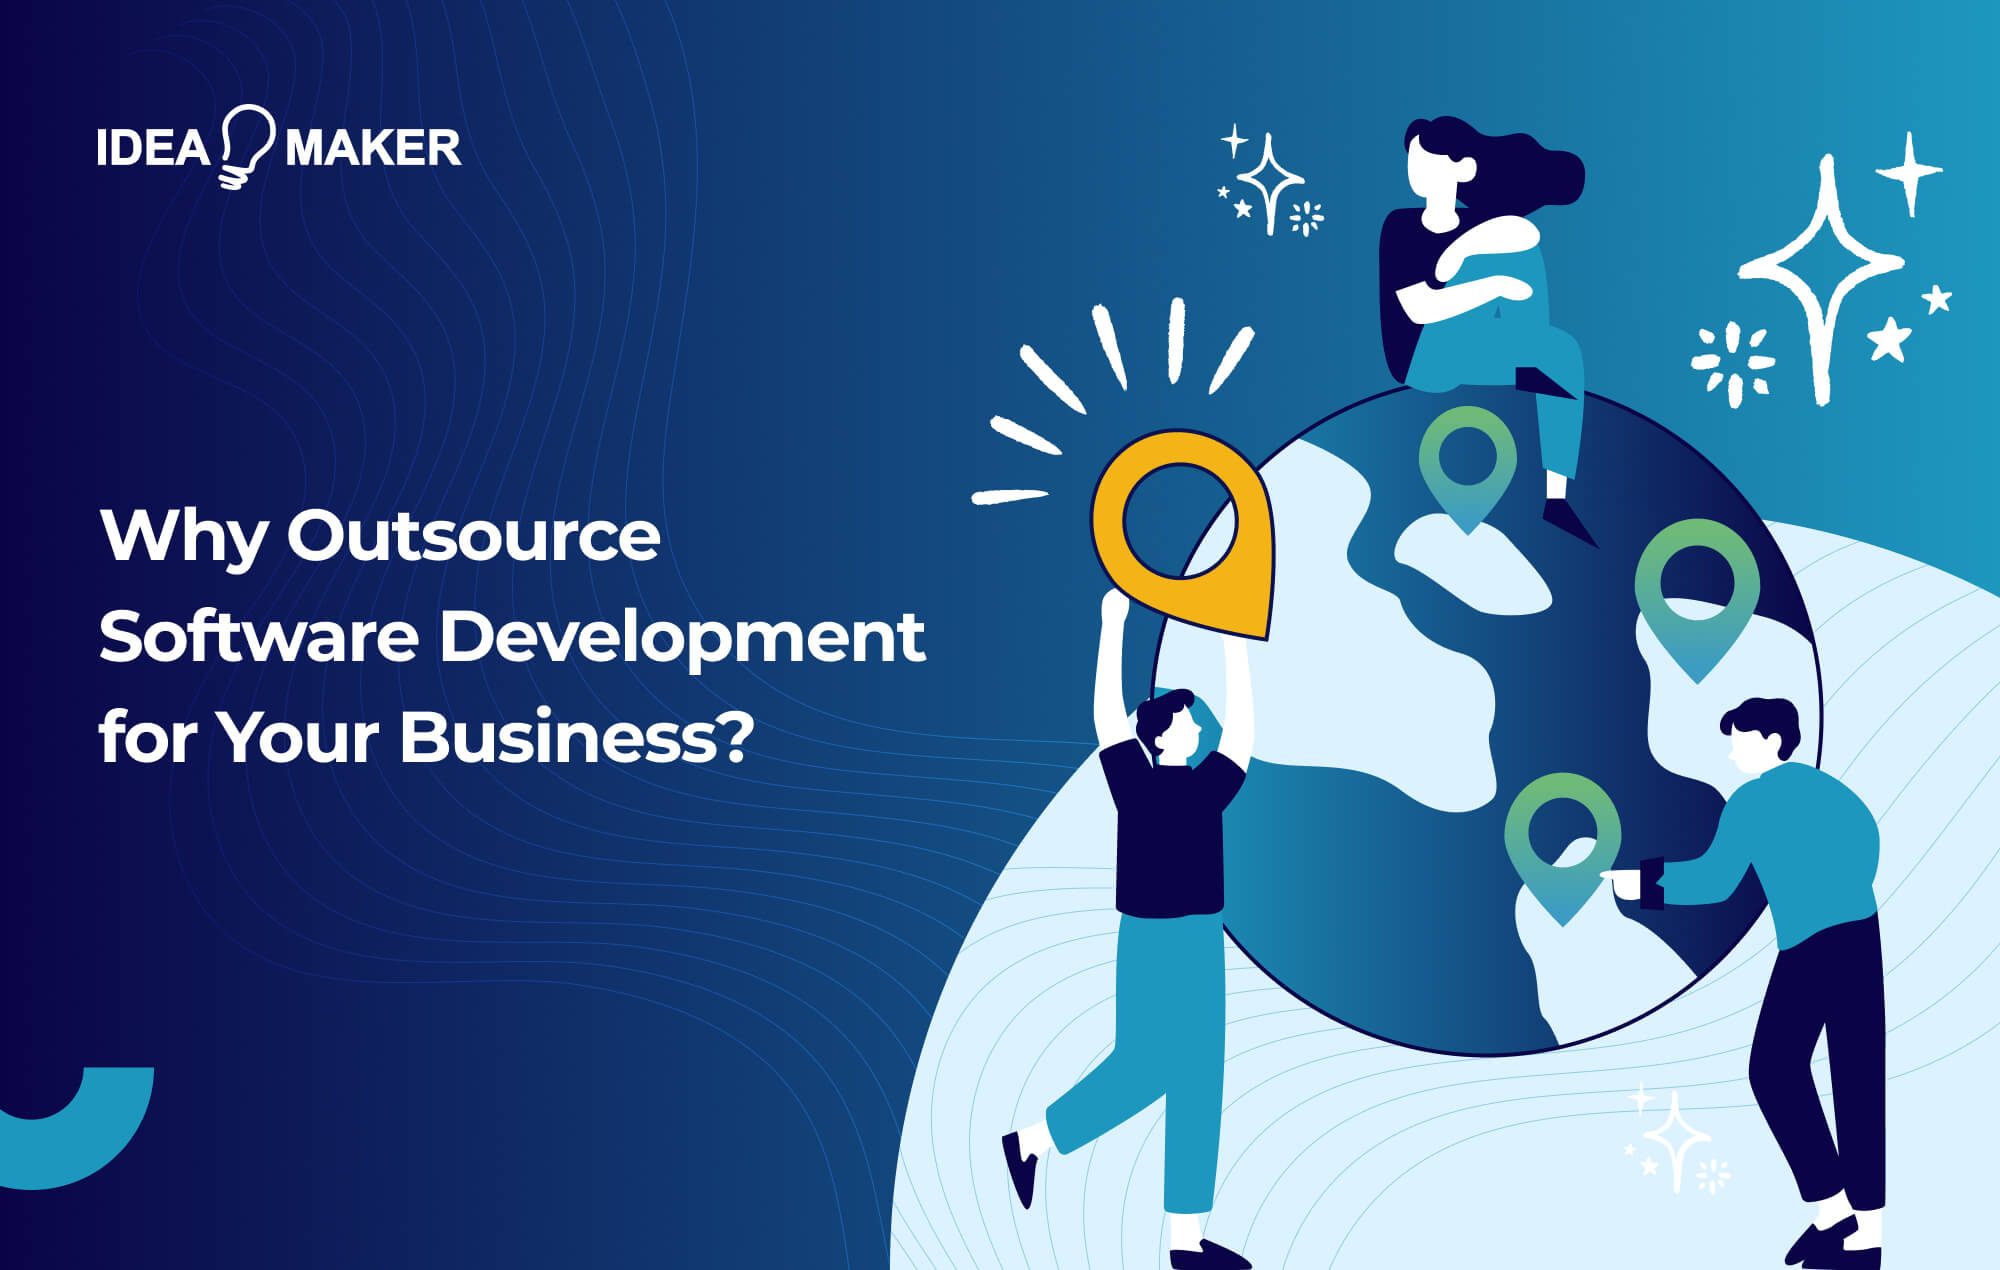 Ideamaker - Why Outsource Software Development for Your Business_